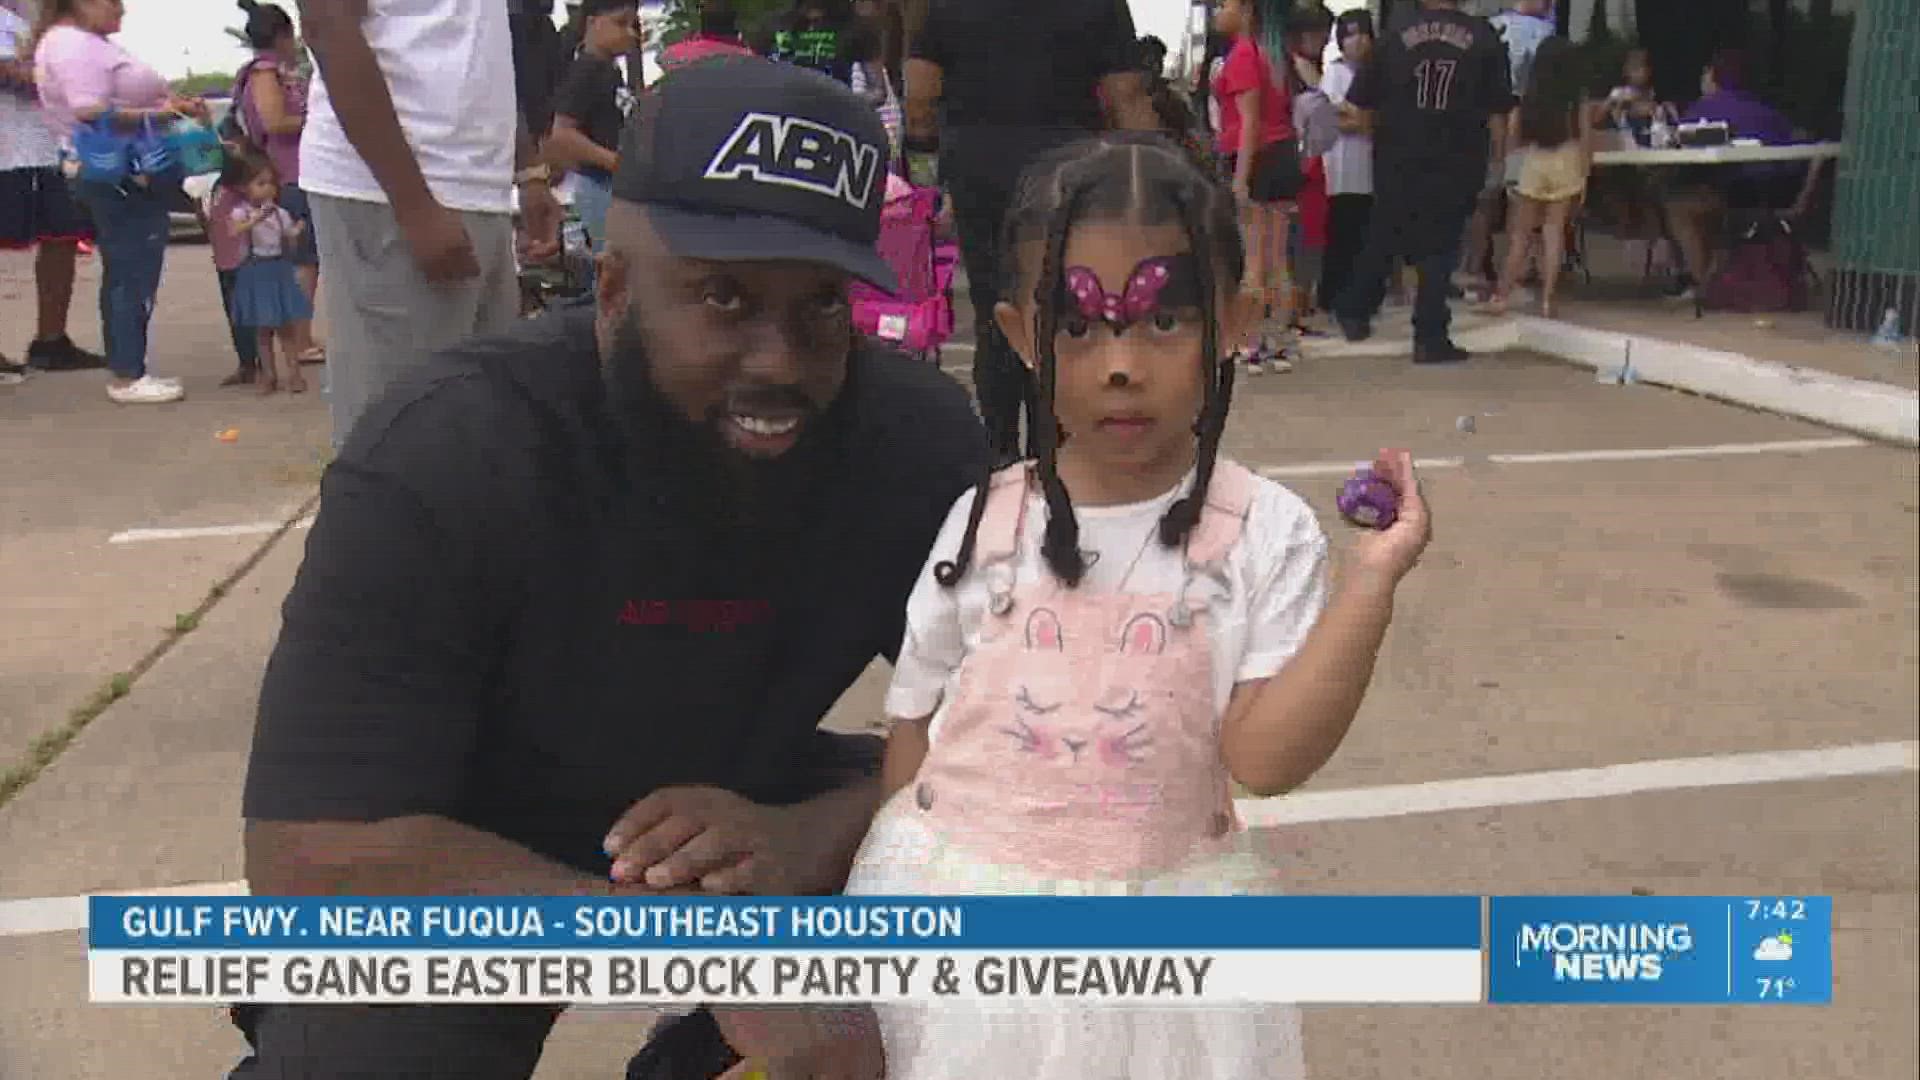 "Sometimes people just need a shoulder to lean on," Trae Tha Truth said during his annual party and giveaway.